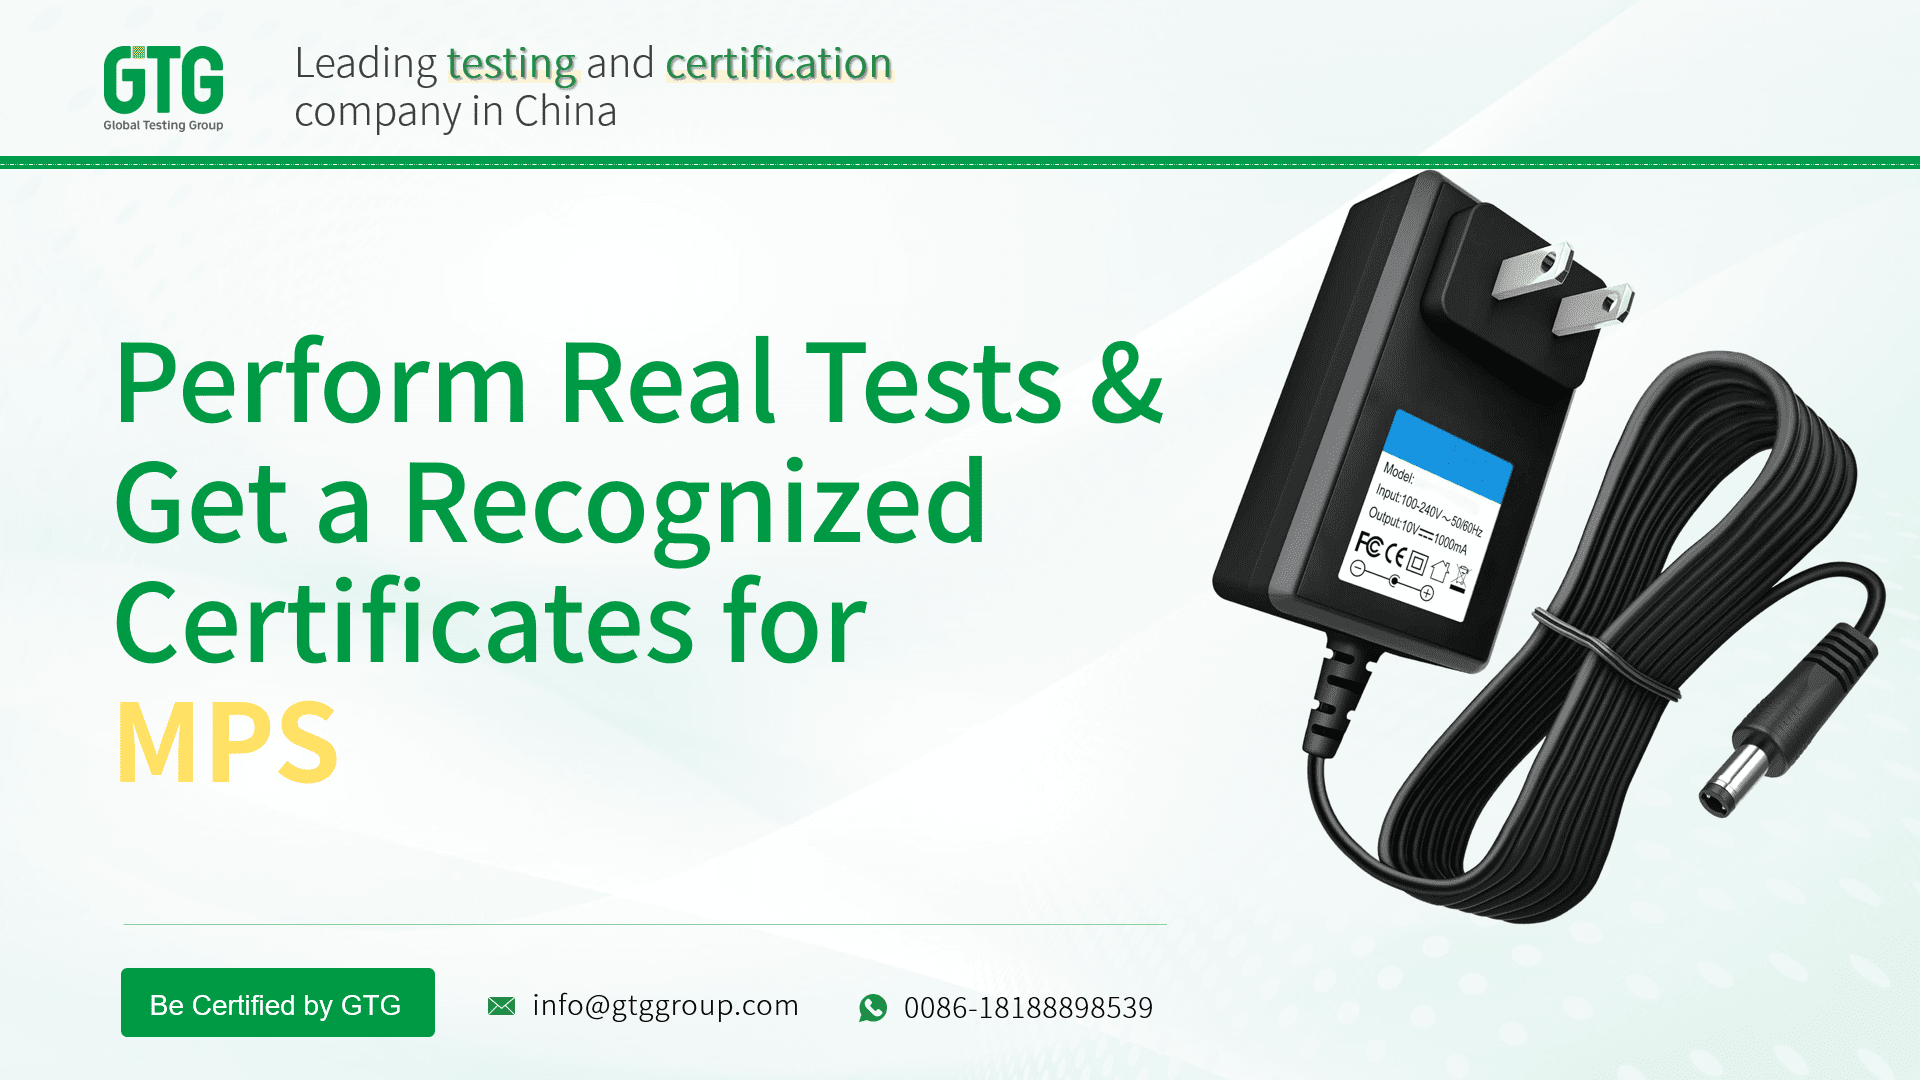 Get Test Report and Certifications for Medical Power Supplies (MPS) from GTG Group